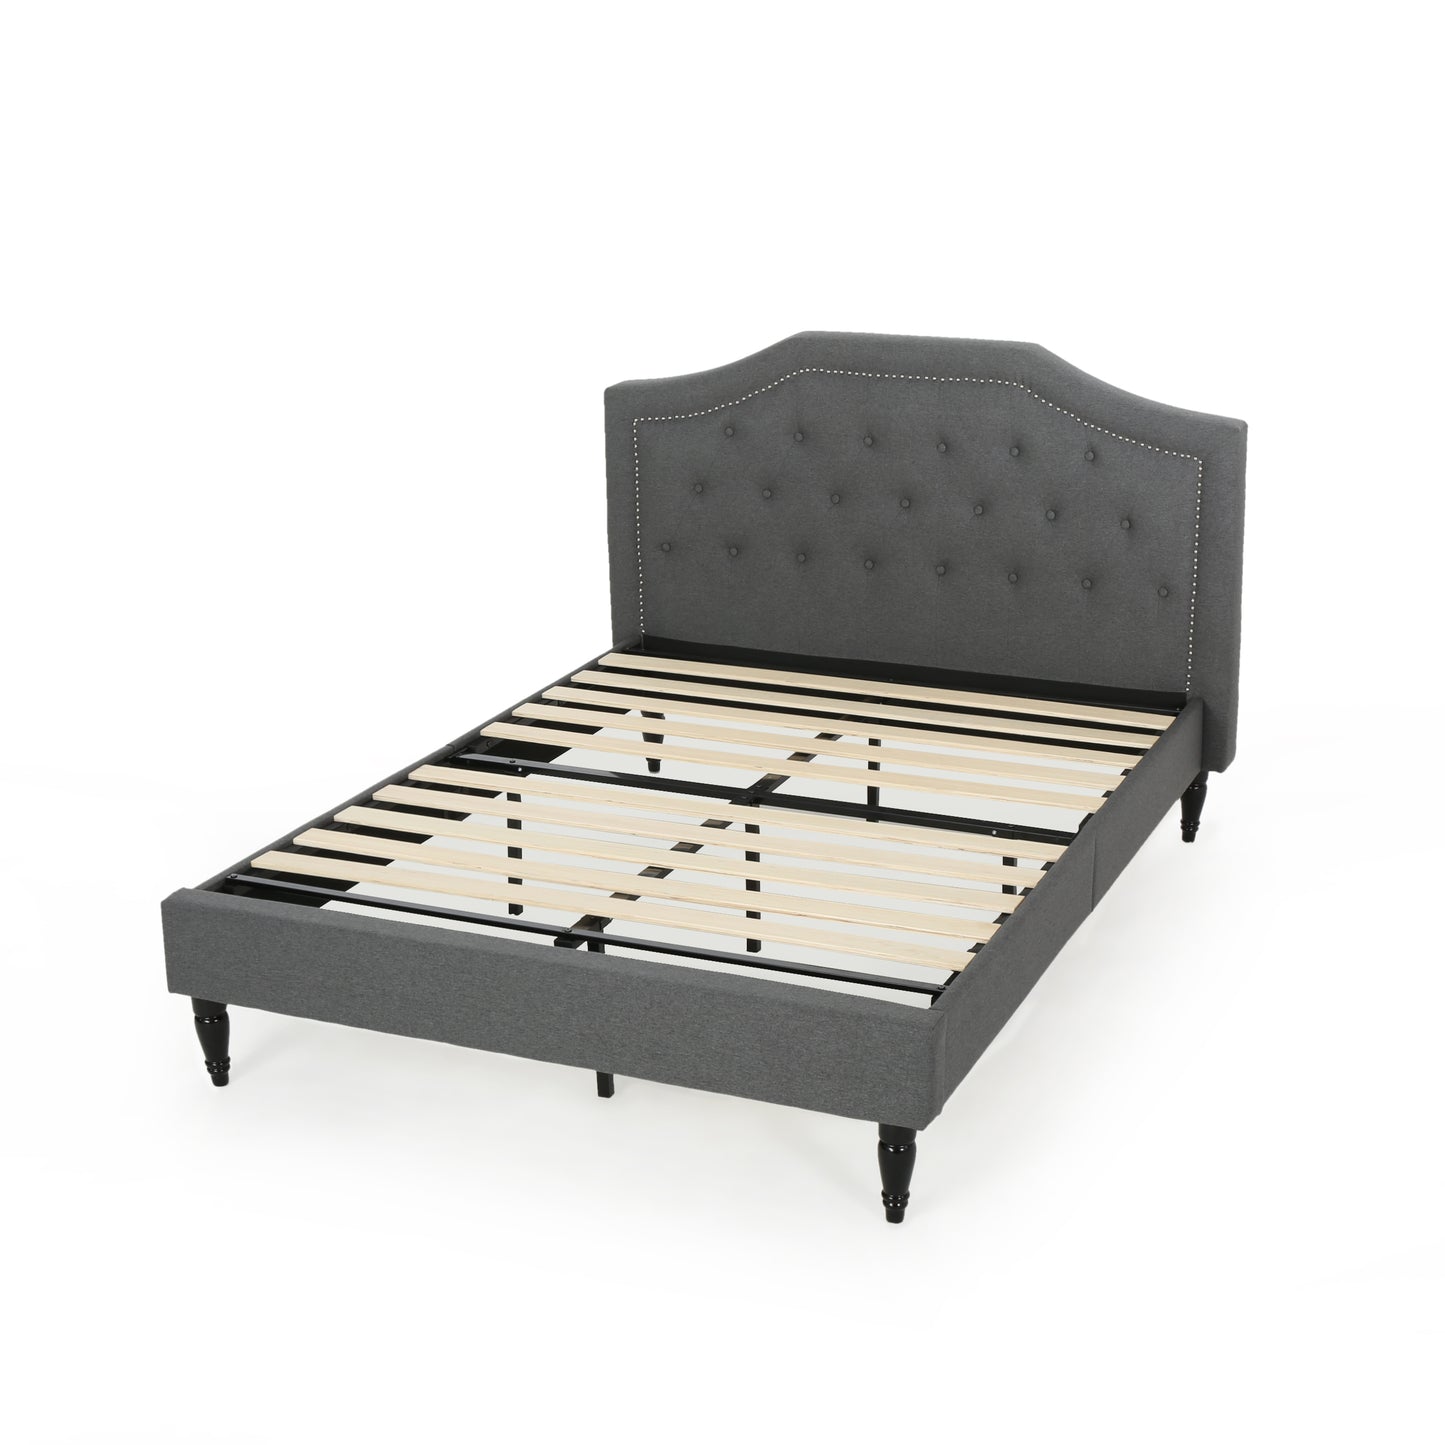 Renee Contemporary Low Profile Fully Upholstered Fabric Platform Bed Frame, Queen